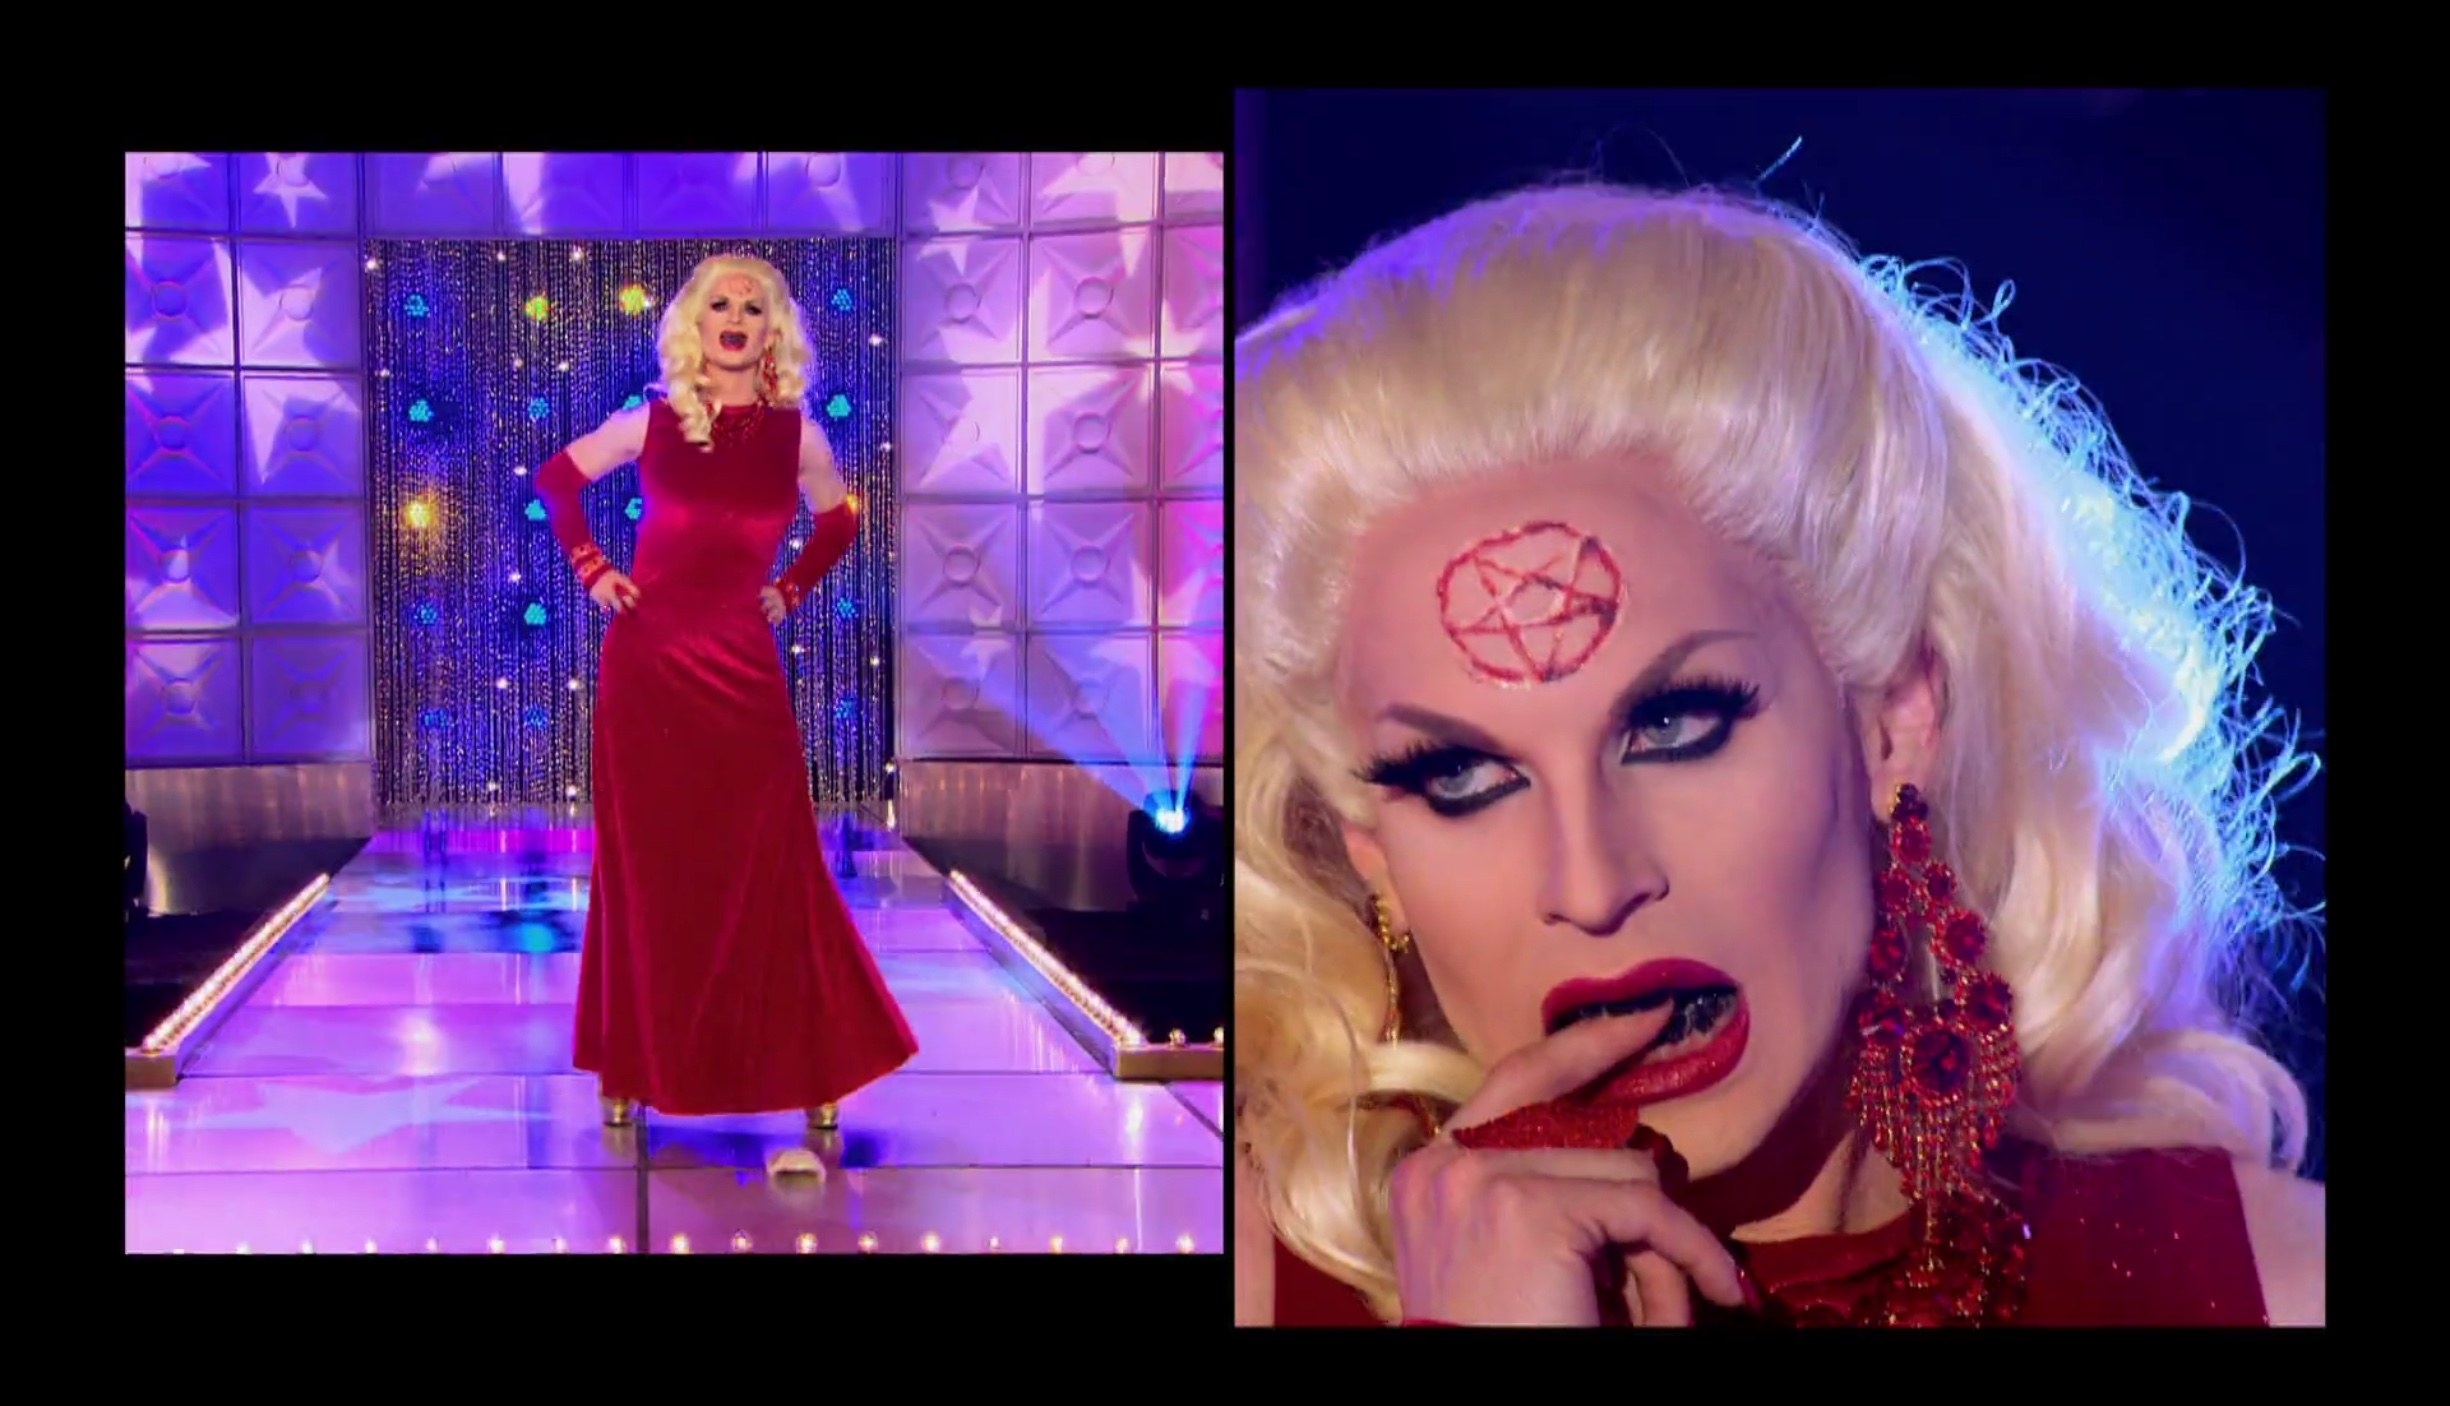 Drag queen Katya wearing a red velvet gown with black teeth and a bloody pentagram on her forehead